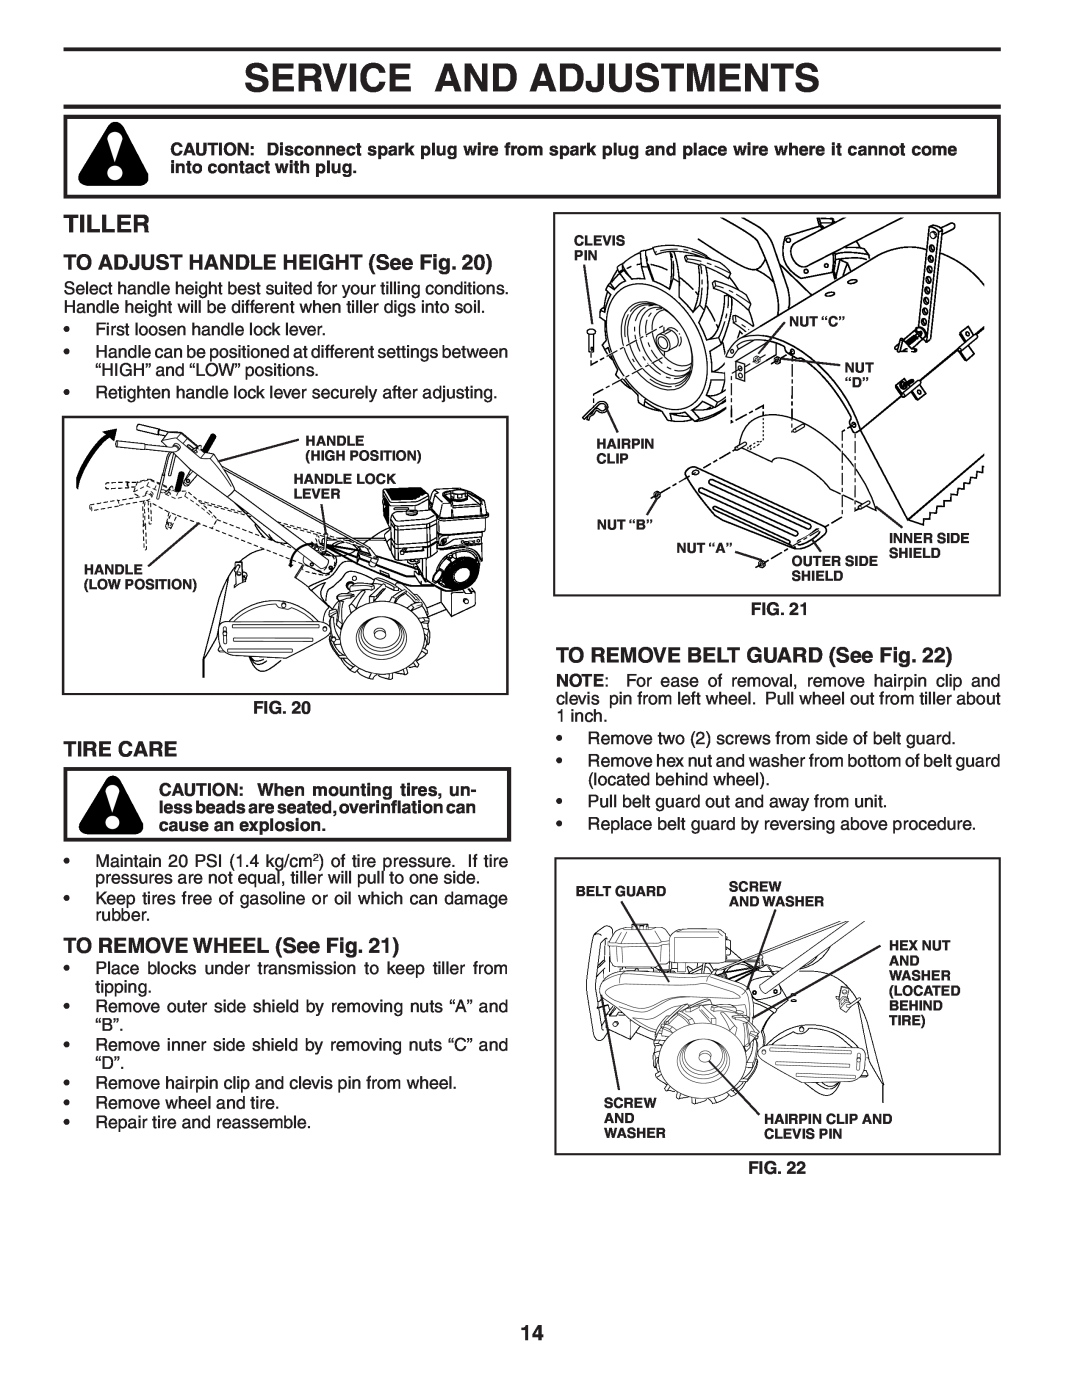 Husqvarna 650CRT Service And Adjustments, Tiller, TO ADJUST HANDLE HEIGHT See Fig, Tire Care, TO REMOVE WHEEL See Fig 